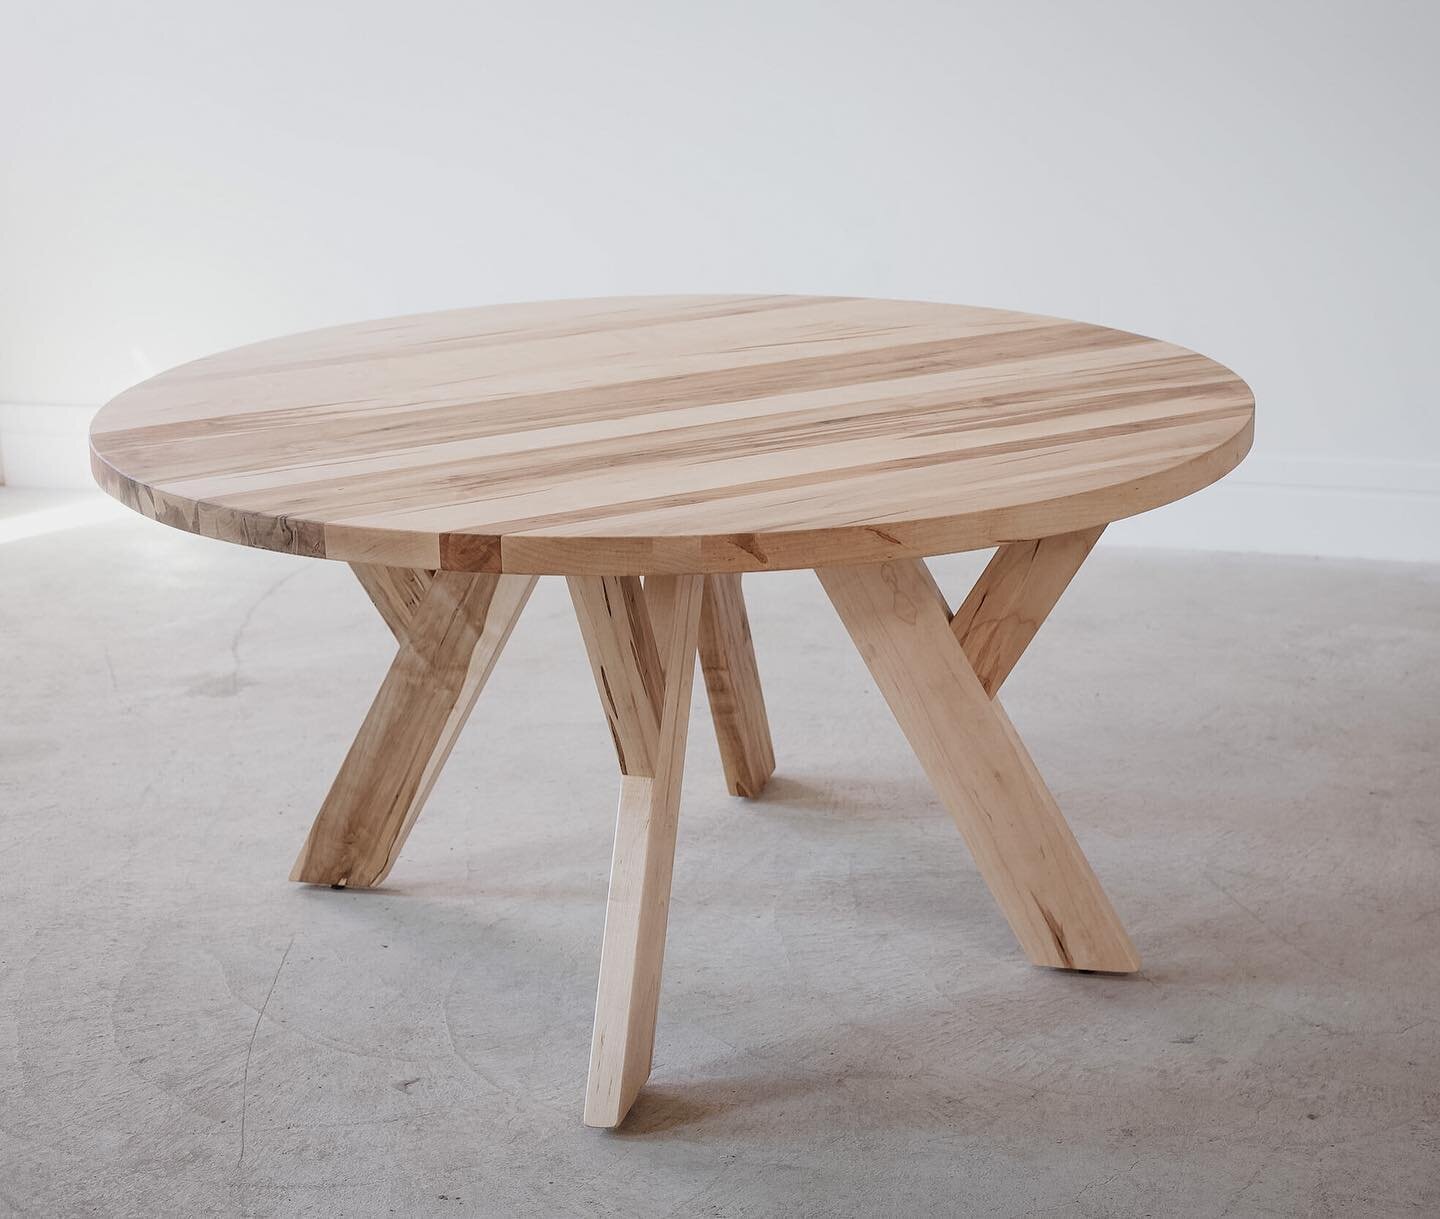 This round dining table is currently available on our website! It is made of solid wormy maple construction and a tung oil finish. Visit our website under &ldquo;shop&rdquo; and &ldquo;available furniture&rdquo; for more info!

#diningtable #moderndi